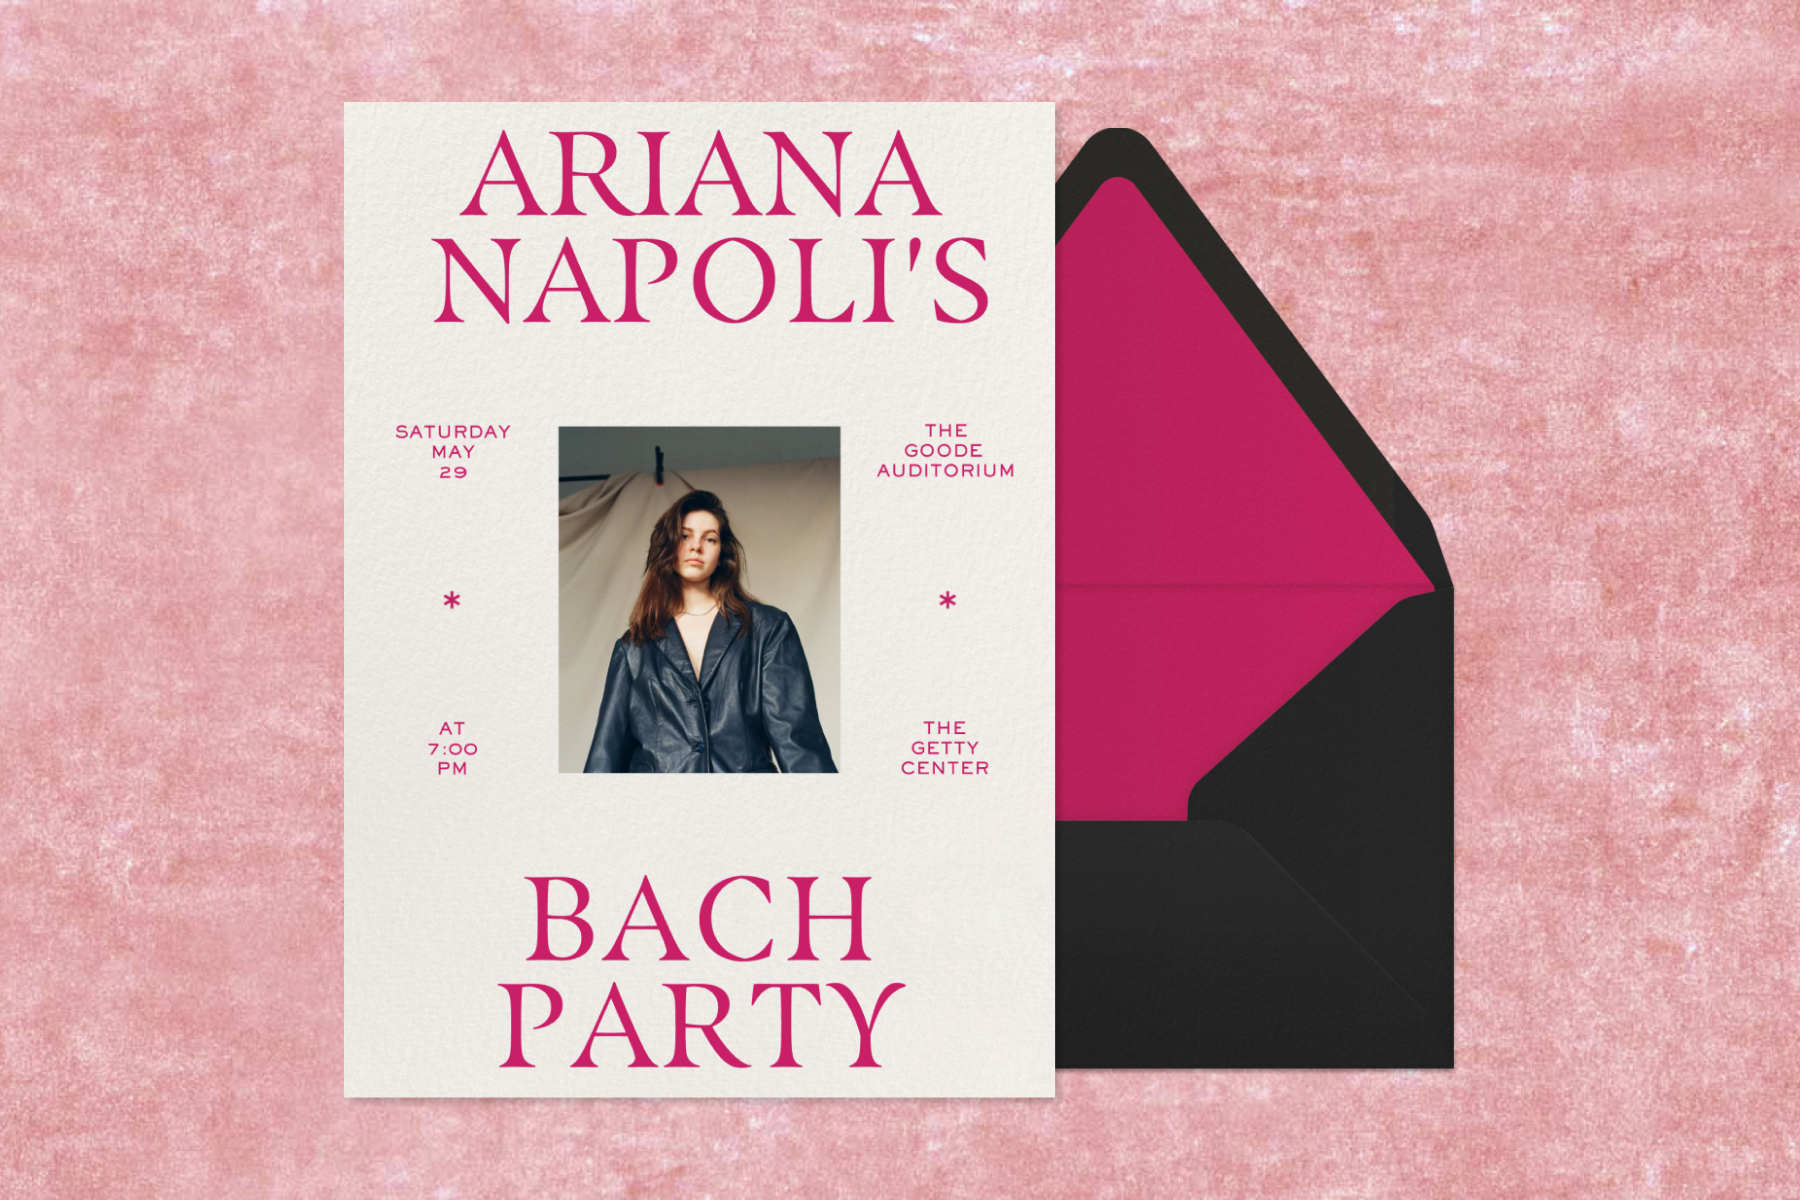 An invitation reads ARIANA NAPOLI’S BACH PARTY in large pink text with a small photo of a woman in the center beside a black and pink envelope.